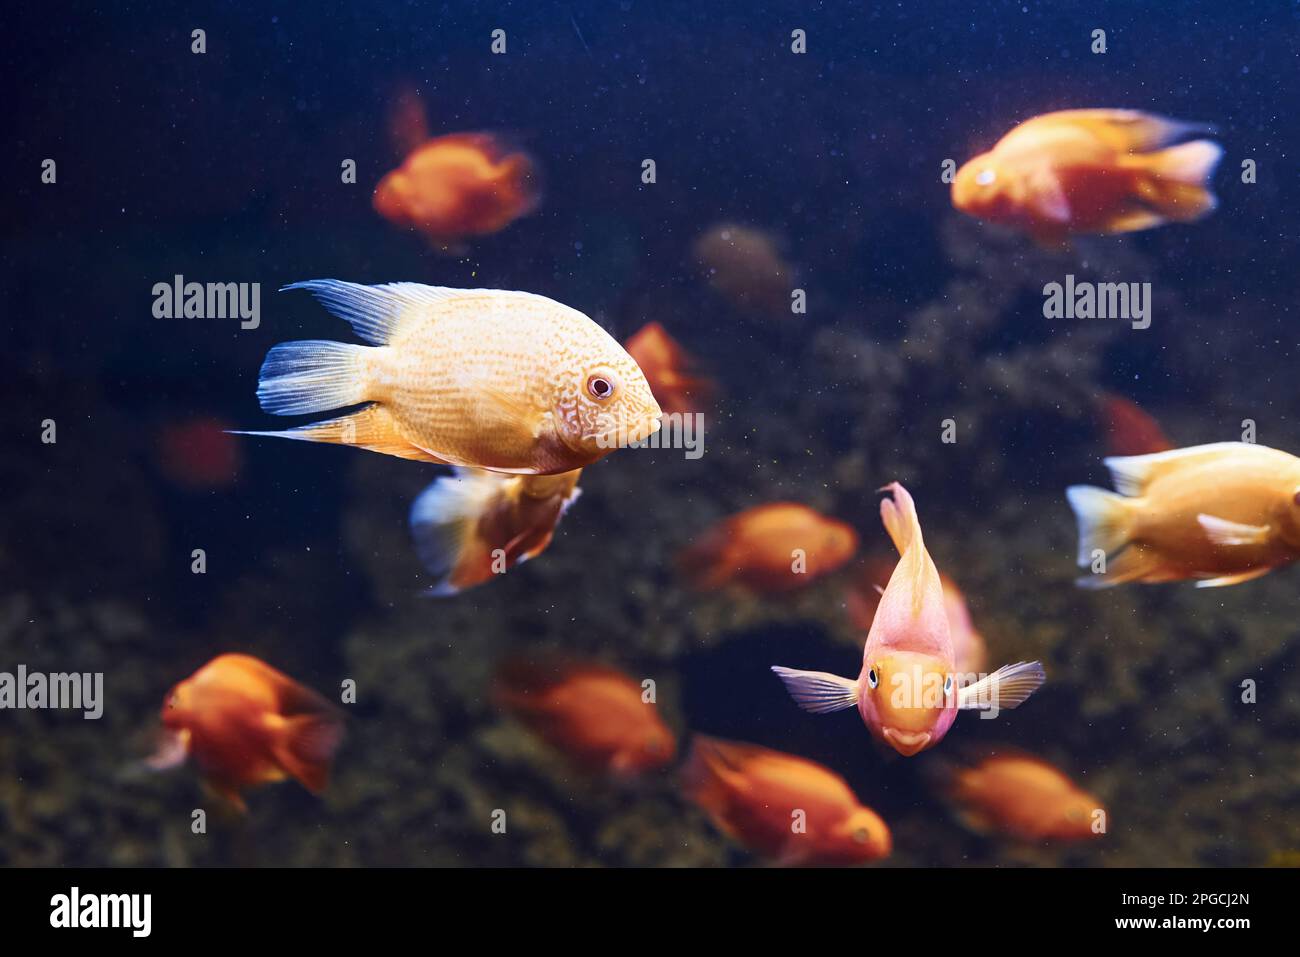 Heros severus. Underwater close up view of tropical fishes. Life in ocean Stock Photo